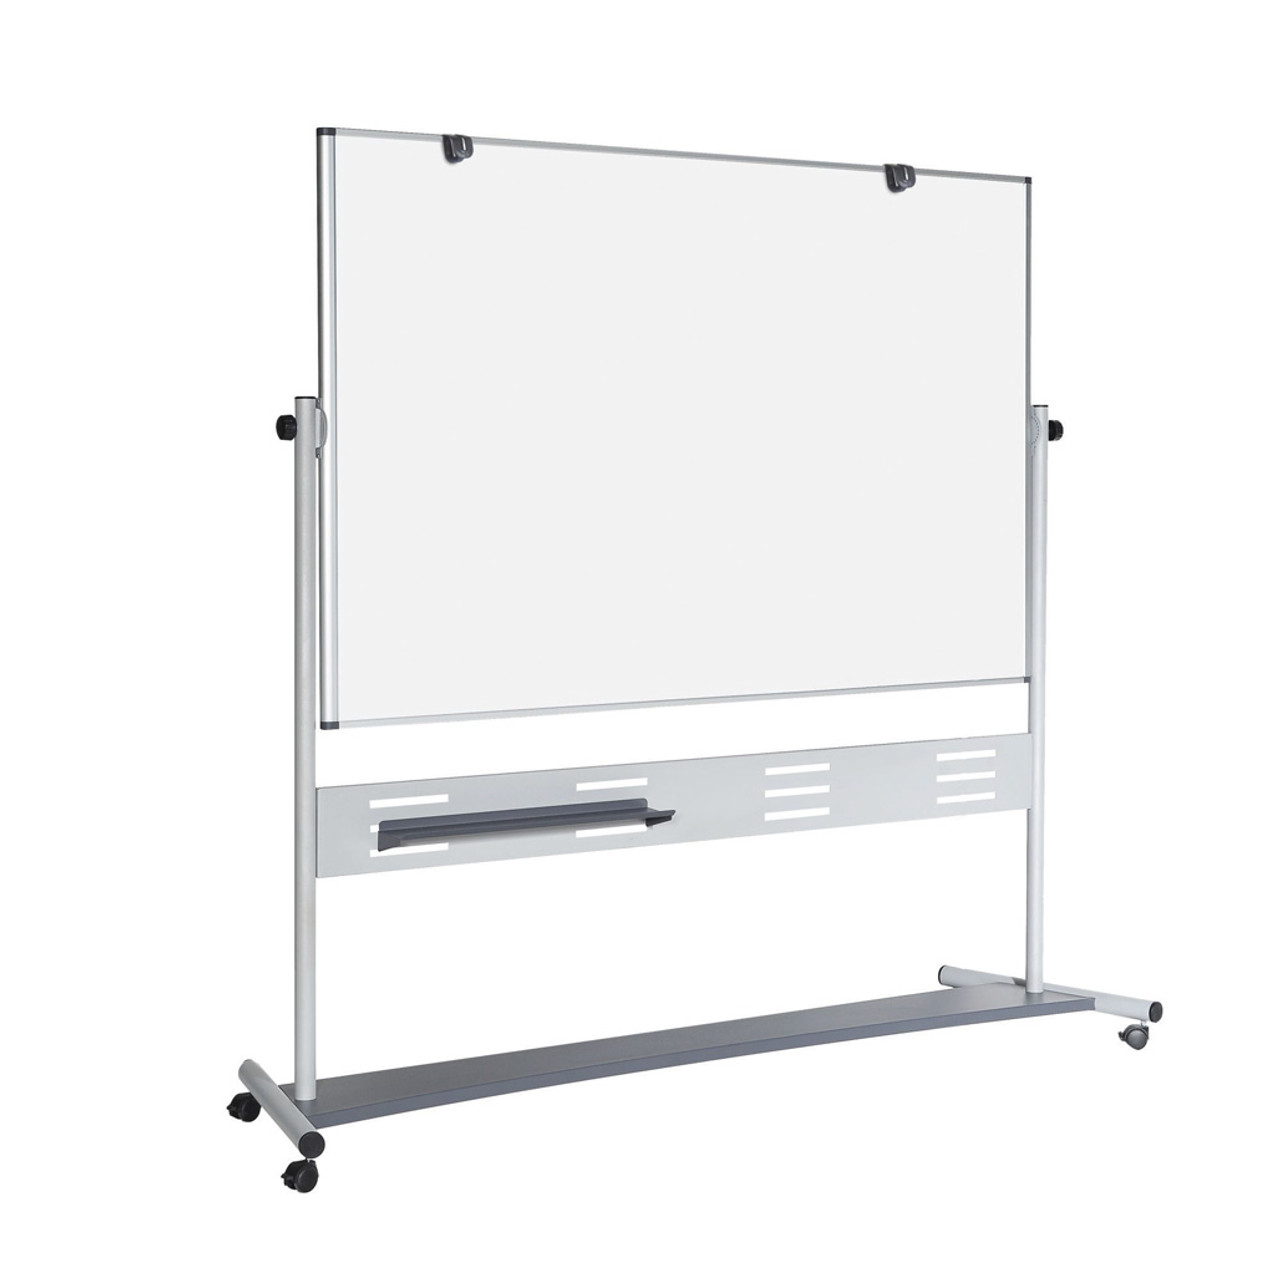 Large Magnetic Revolving Whiteboard, Corporate, Meeting